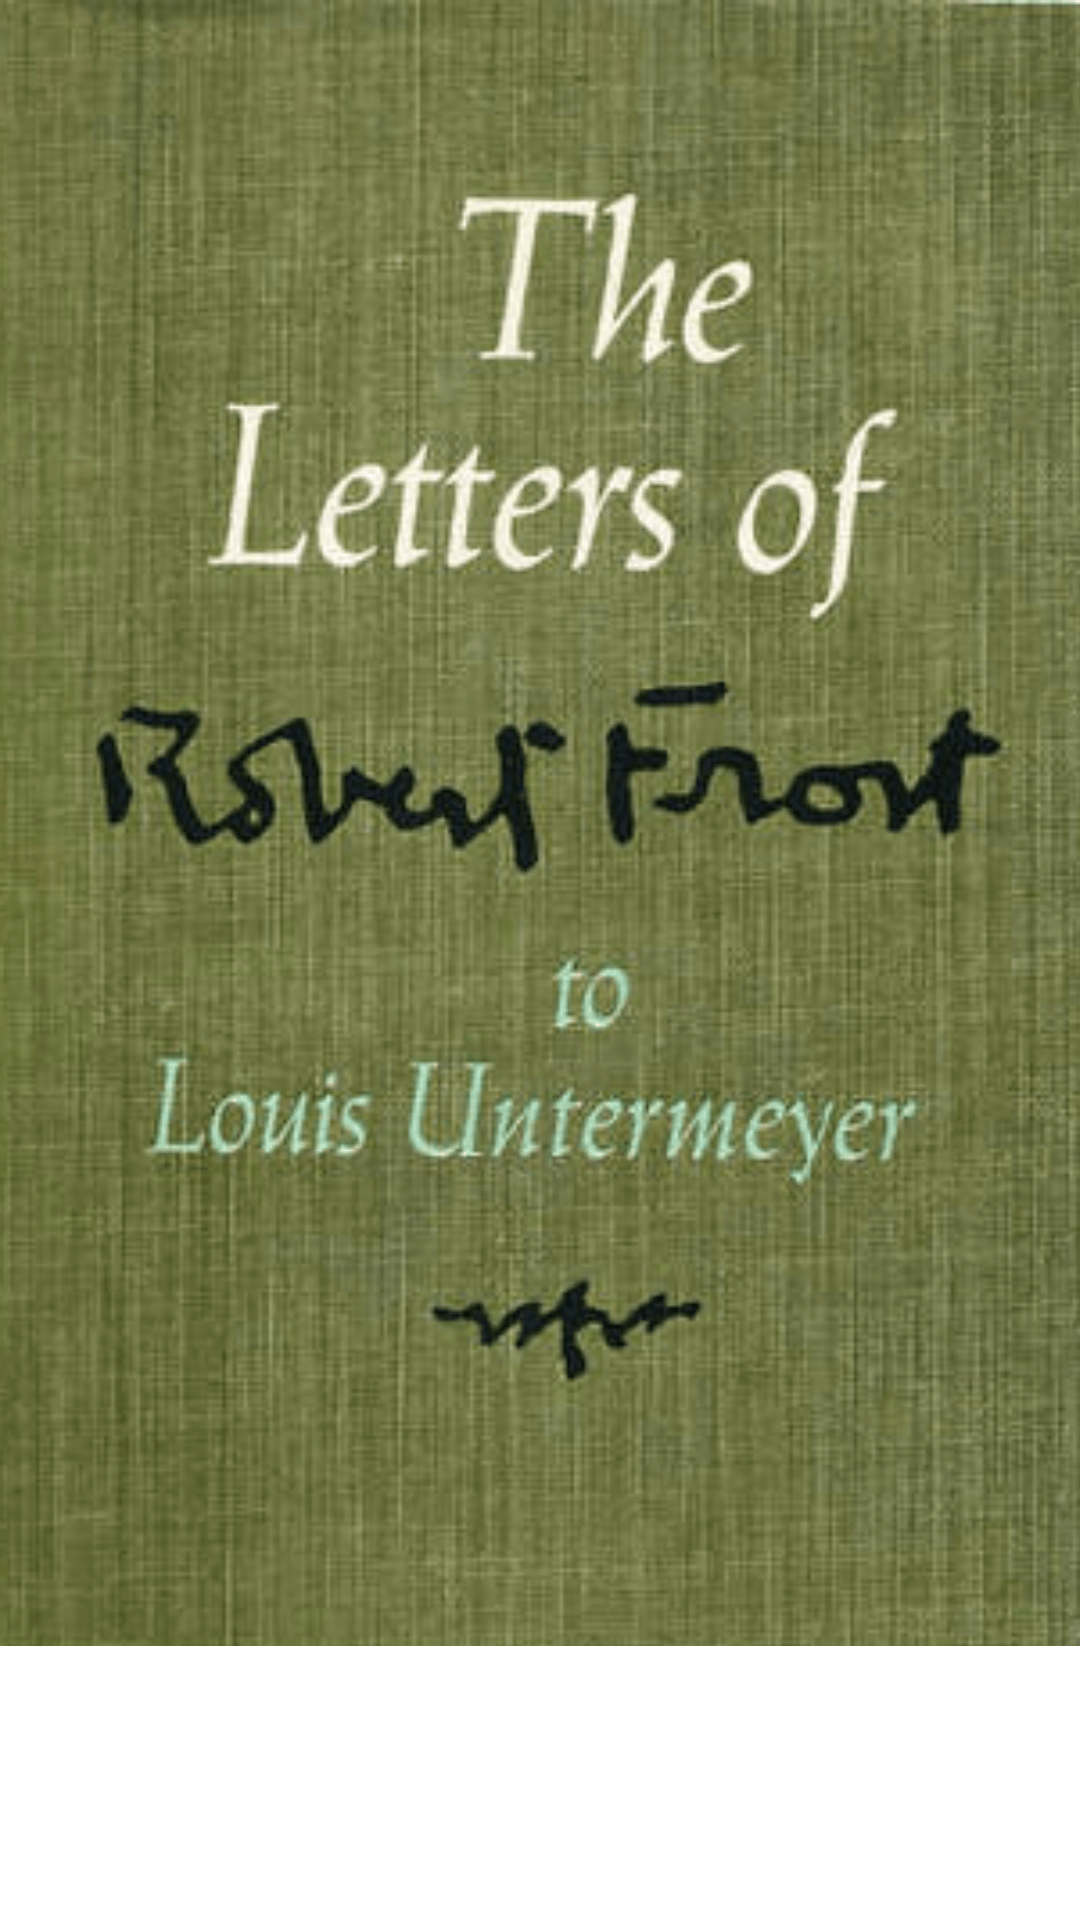 The Letters Of Robert Frost To Louis Untermeyer